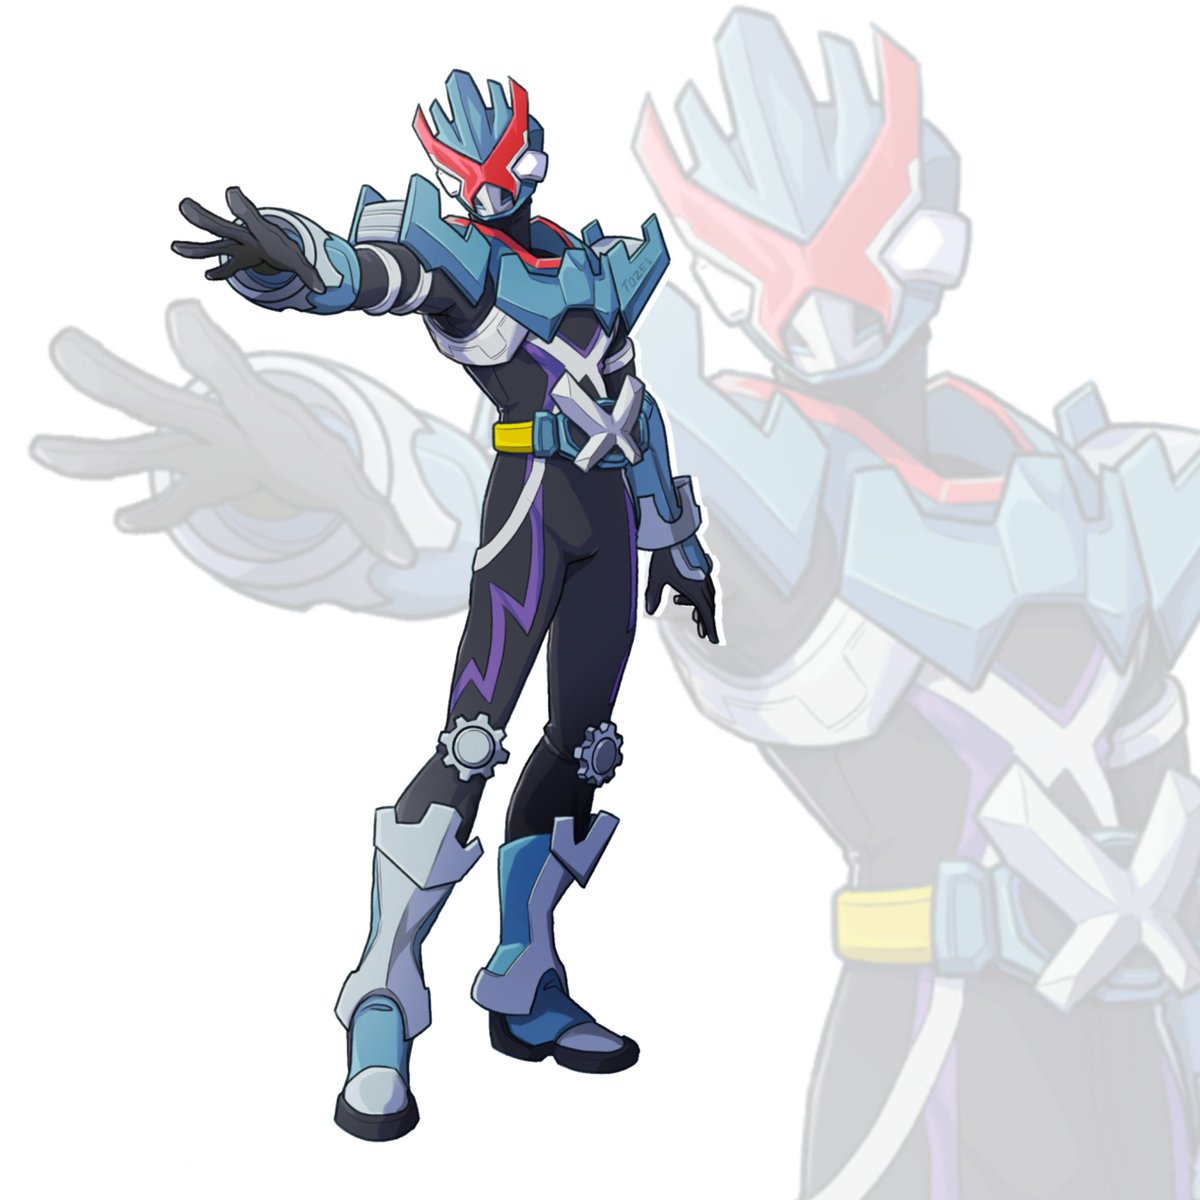 「Steven Stone as Kamen Rider Metagross

R」|TO ZEのイラスト